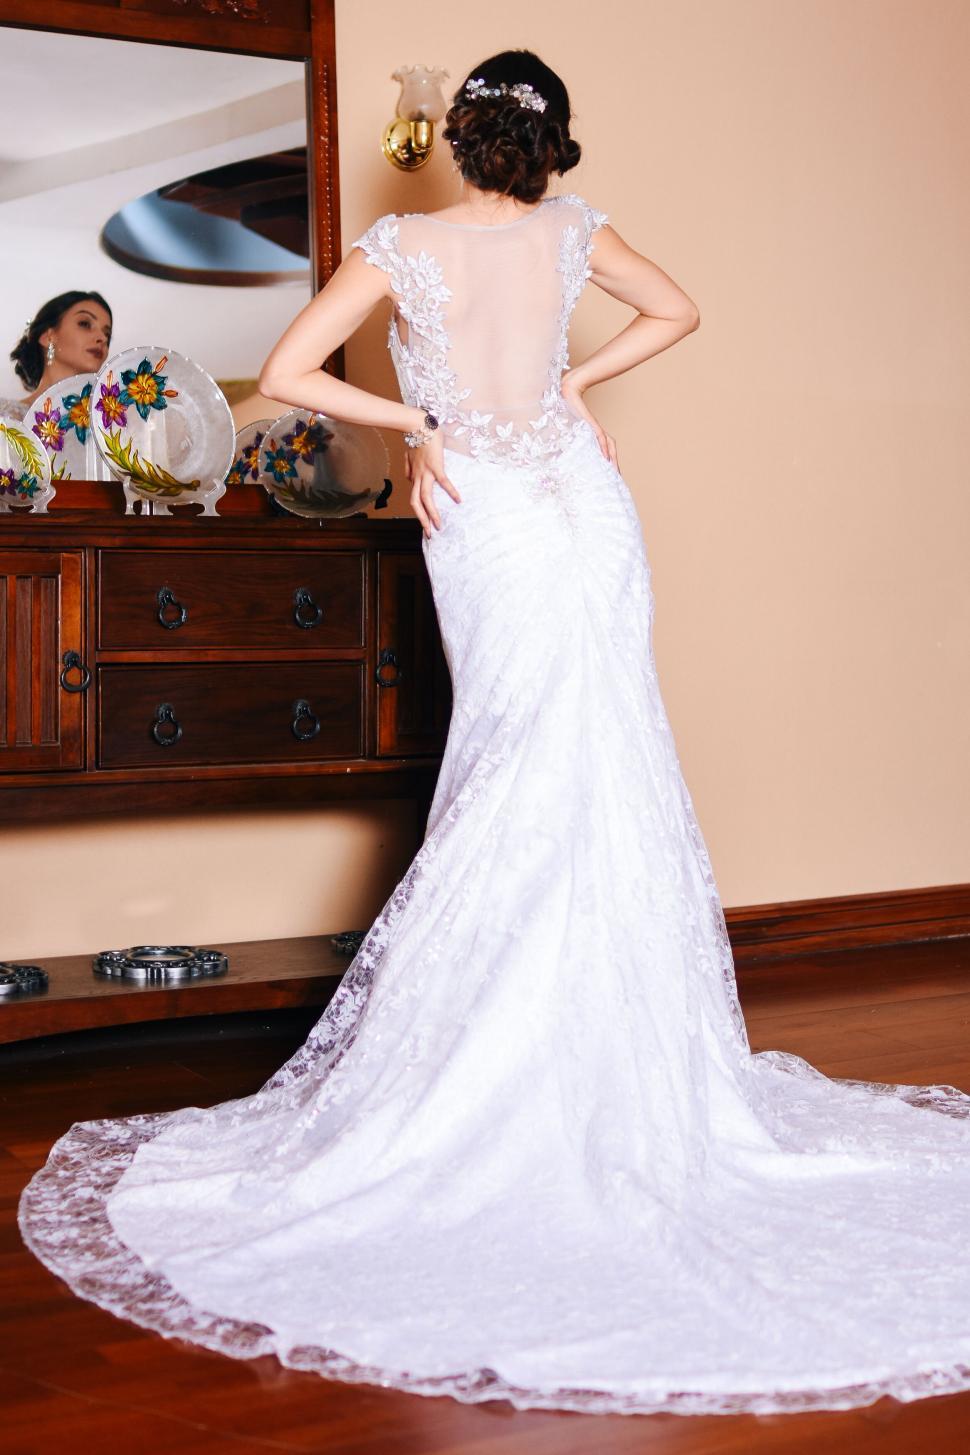 Free Image of Bride in intricate backless wedding gown 